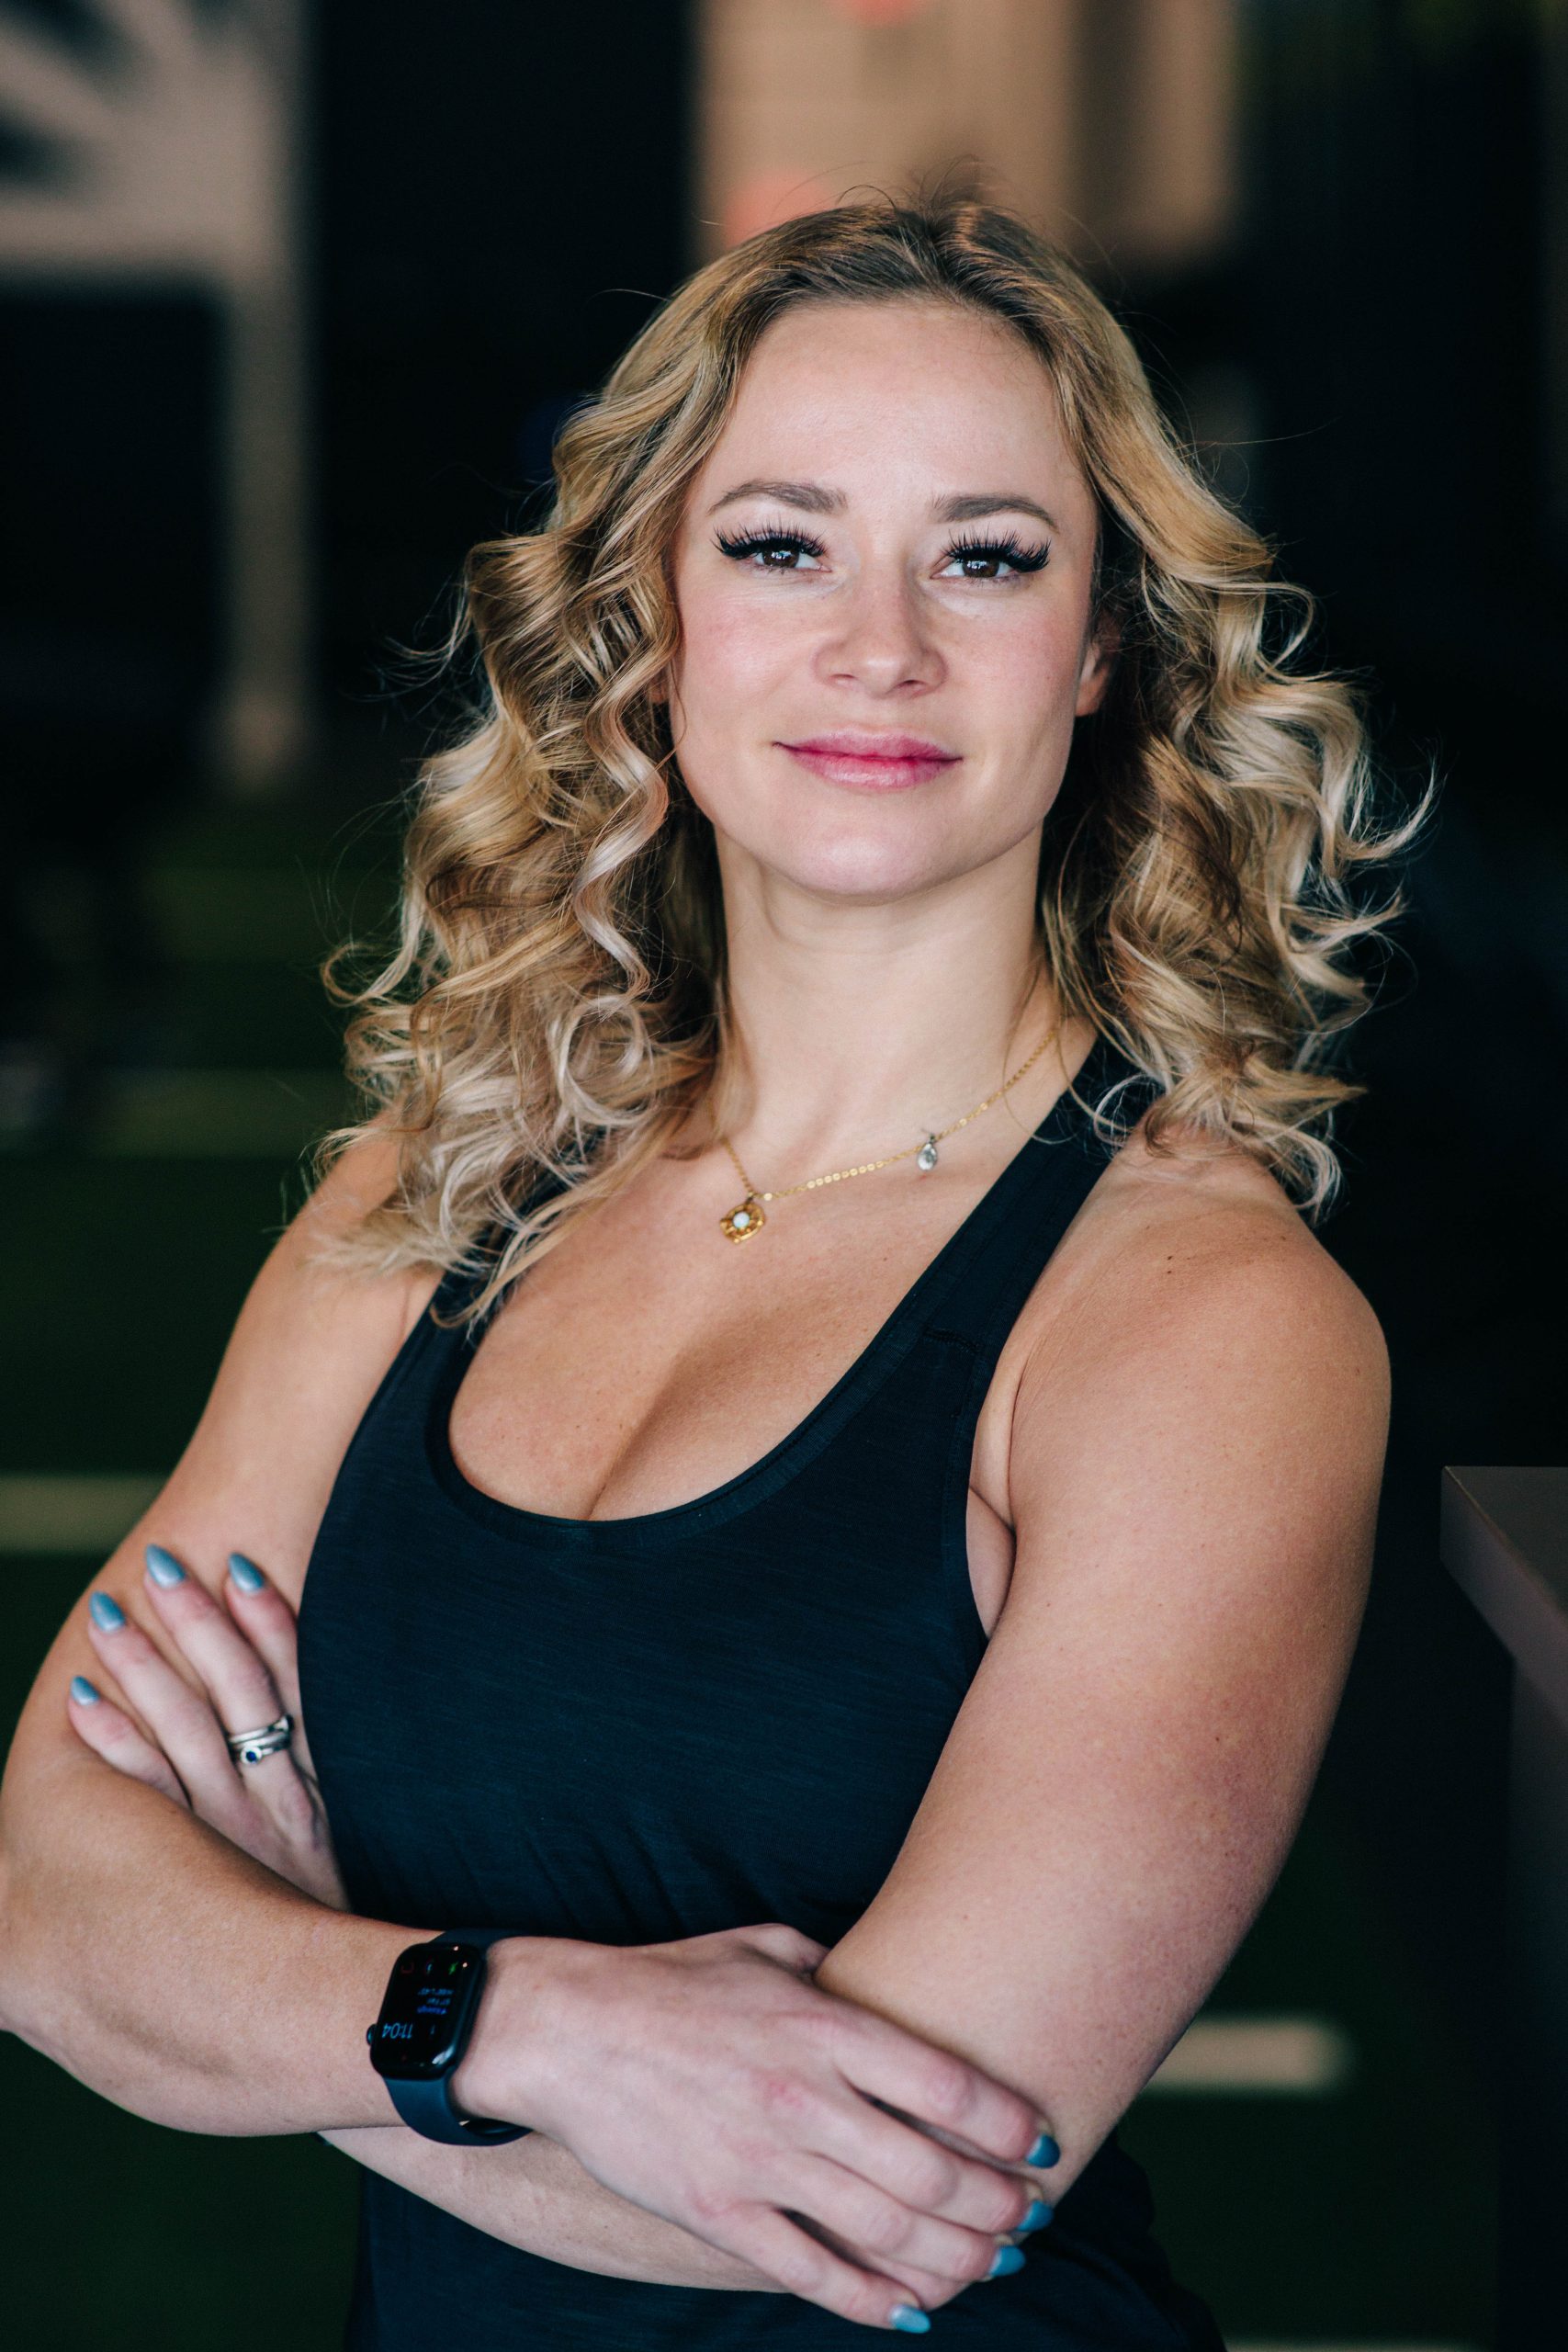 Kayla Scott, Personal Trainer and Group Fitness Instructor